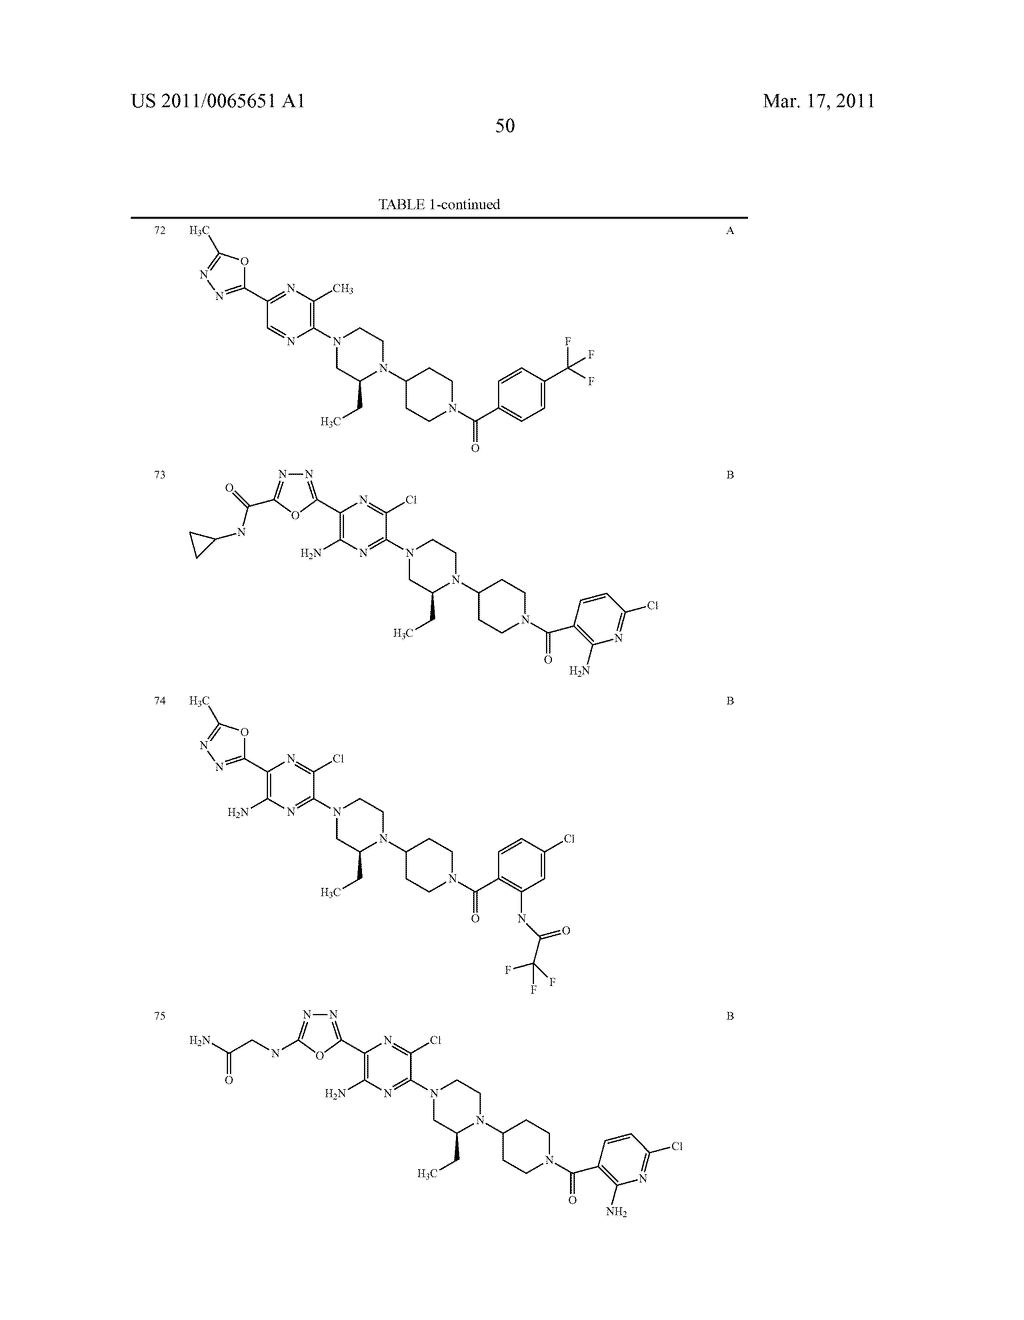 HETEROCYCLIC SUBSTITUTED PIPERAZINES WITH CXCR3 ANTAGONIST ACTIVITY - diagram, schematic, and image 51